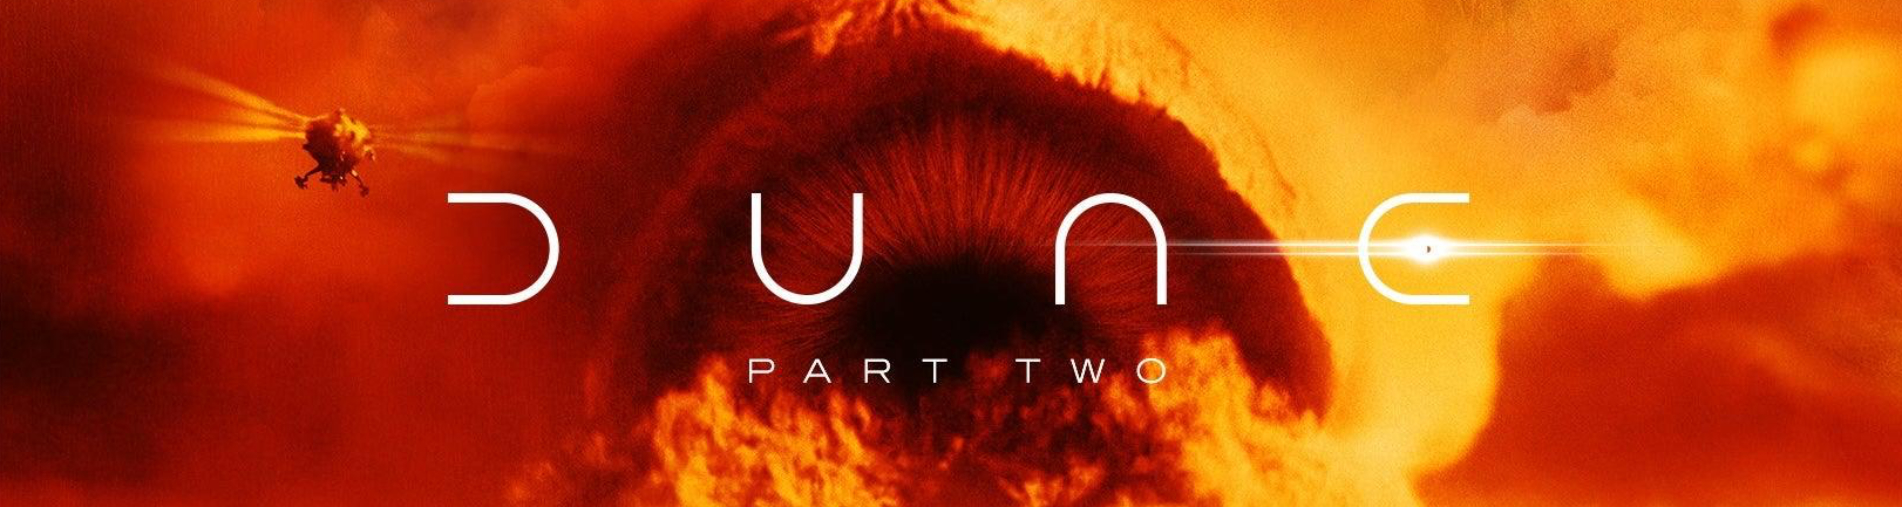 Unusual Rigging & Engineering is a big screen hit, with Dune: Part 2